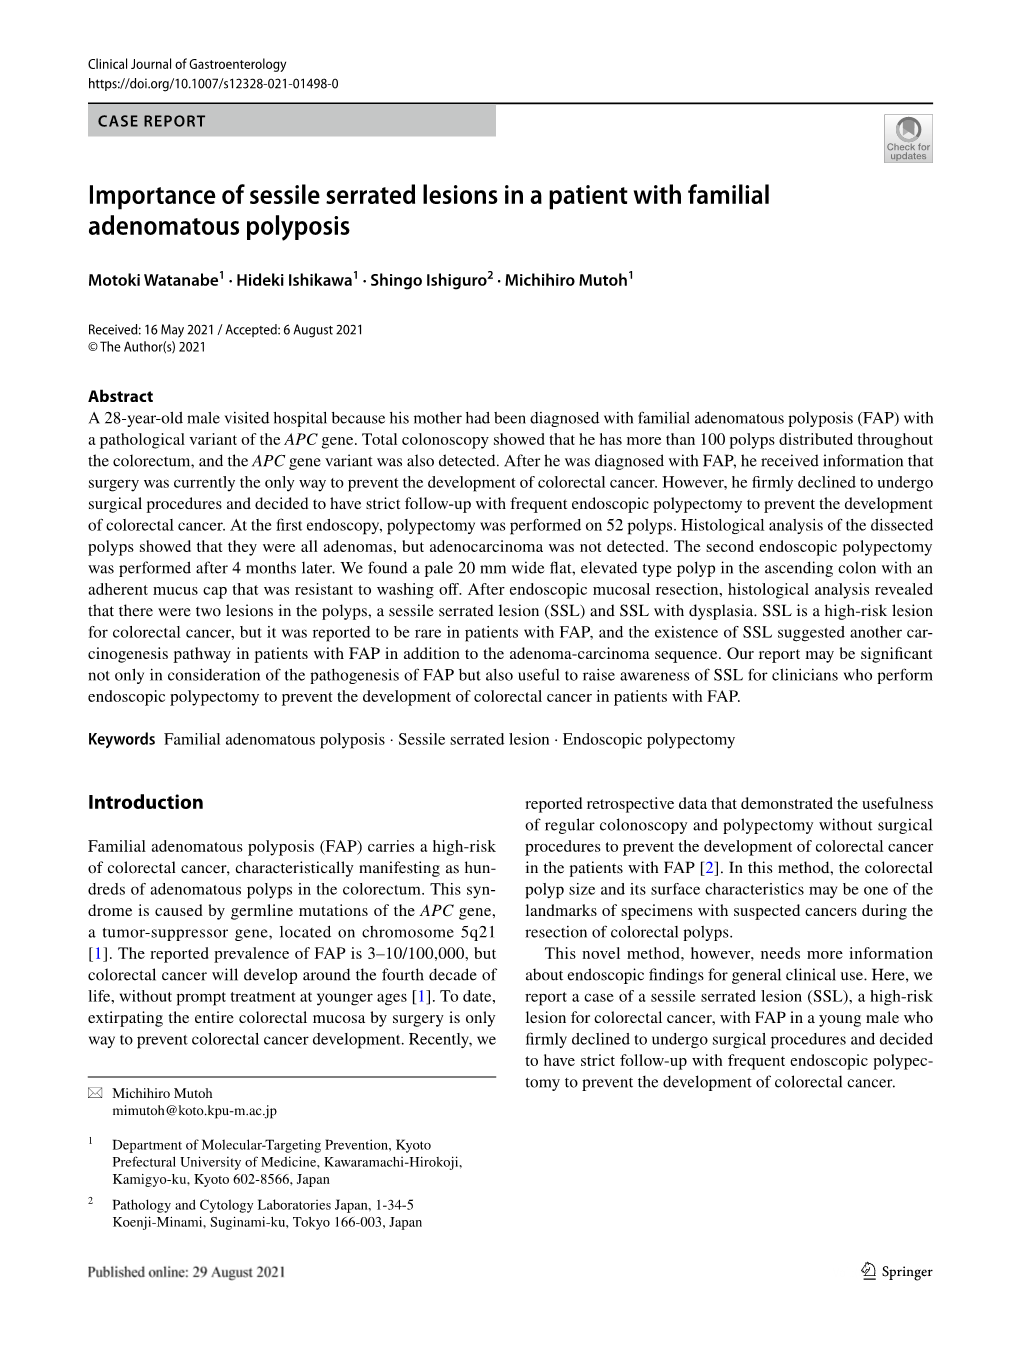 Importance Of Sessile Serrated Lesions In A Patient With Familial